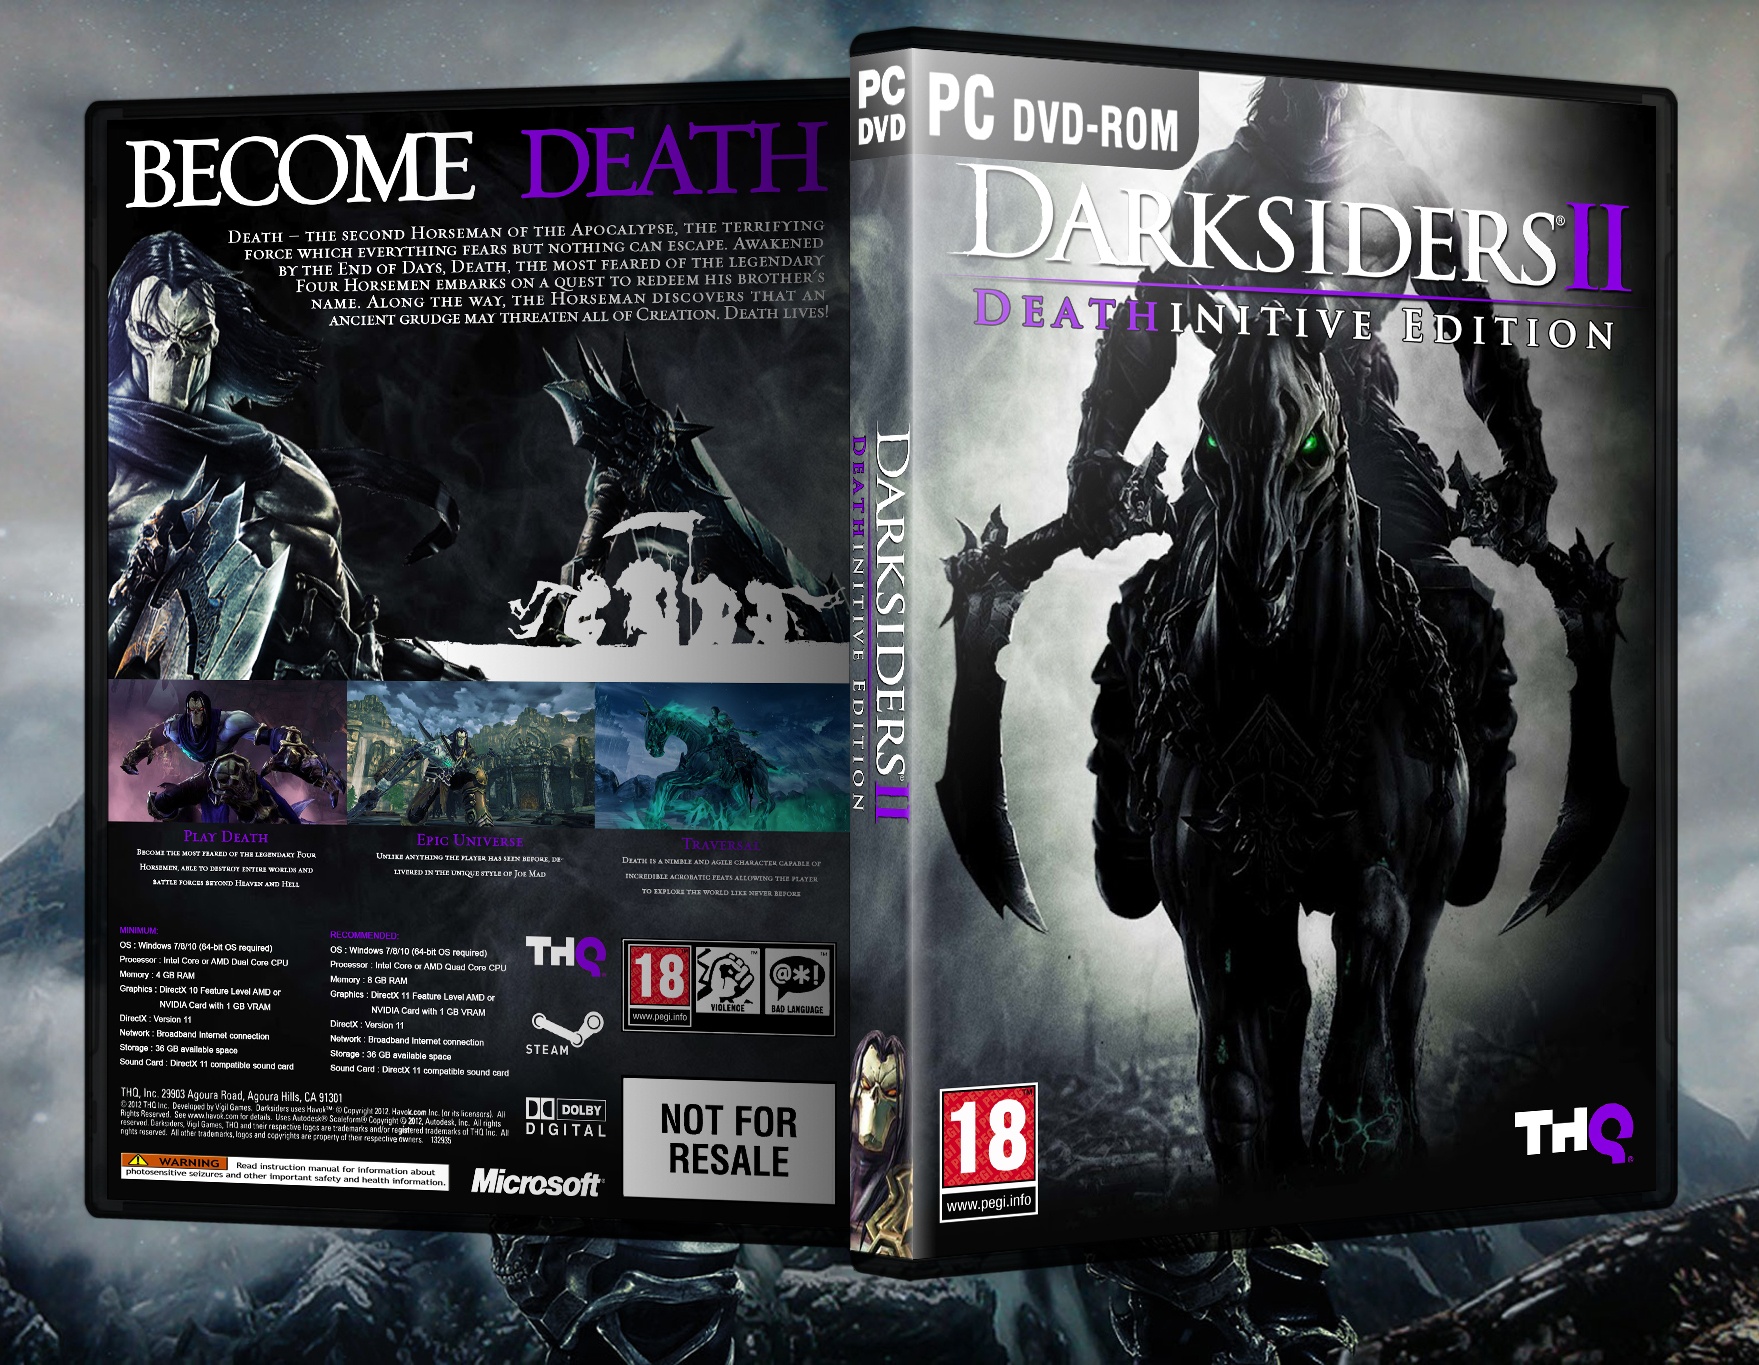 Darksiders II Deathinitive Edition box cover